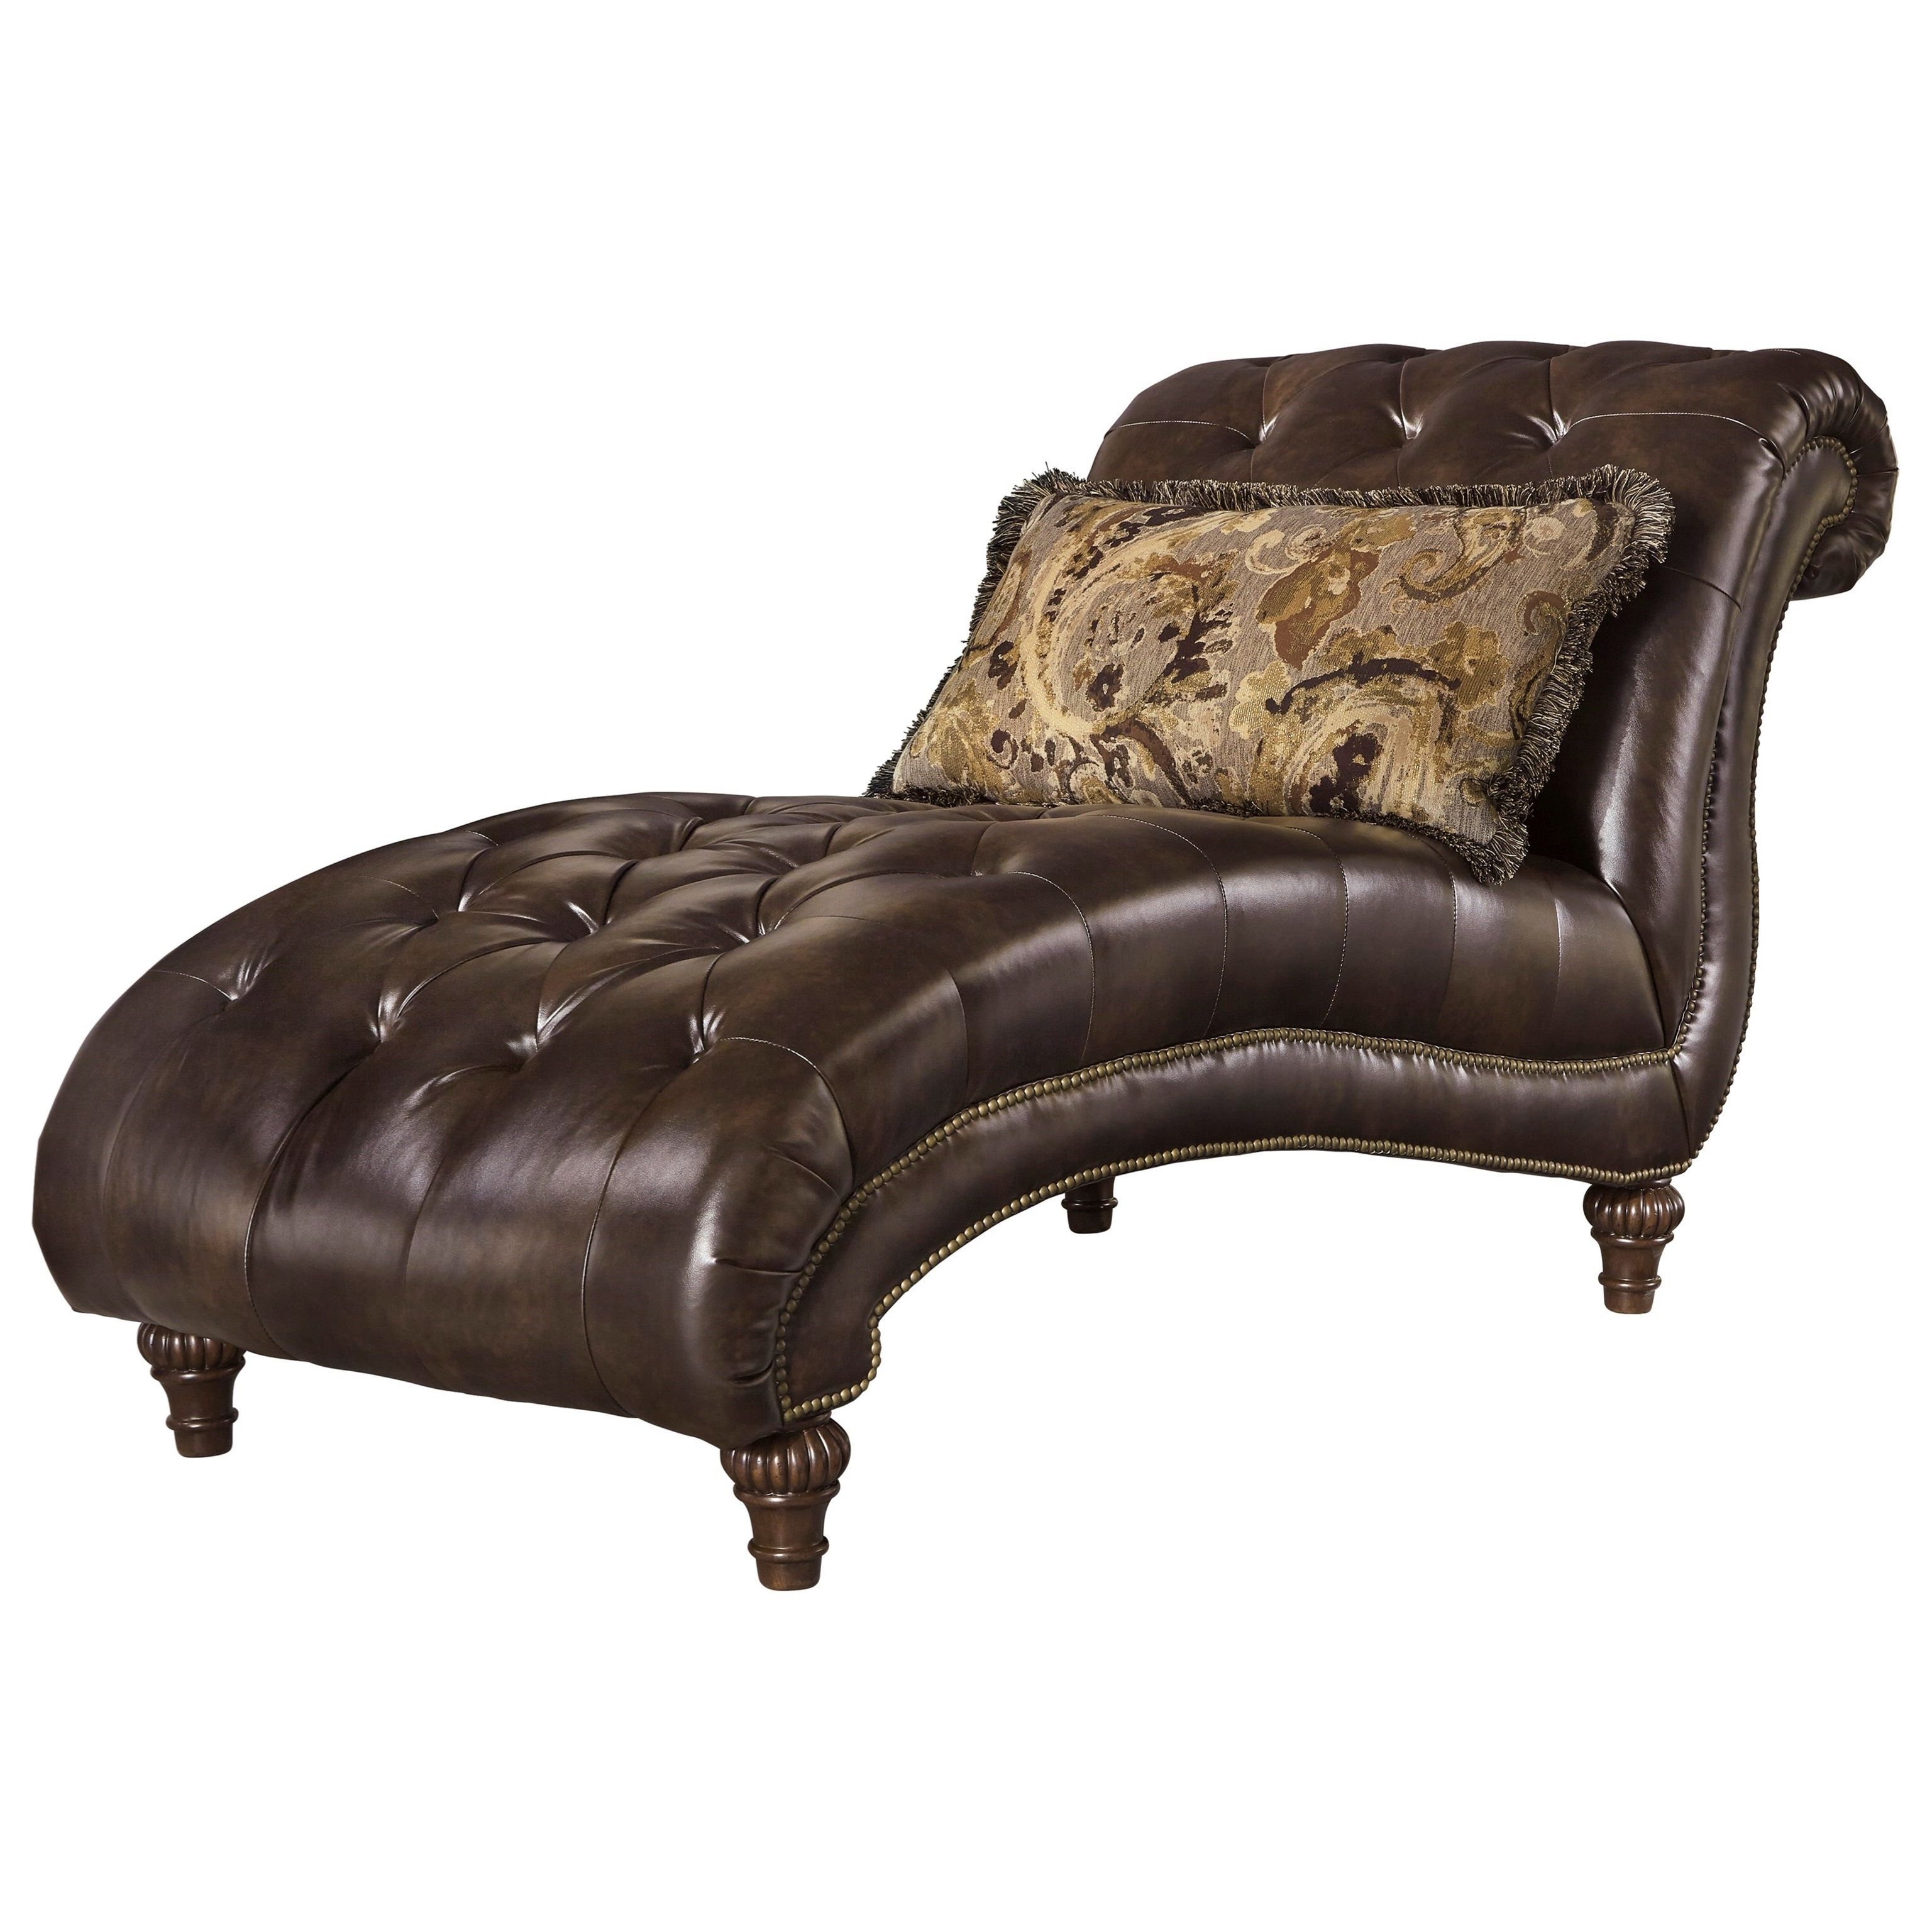 Ashley Chaise Lounges Within Well Liked Signature Designashley Winnsboro Durablend Traditional Tufted (View 9 of 15)